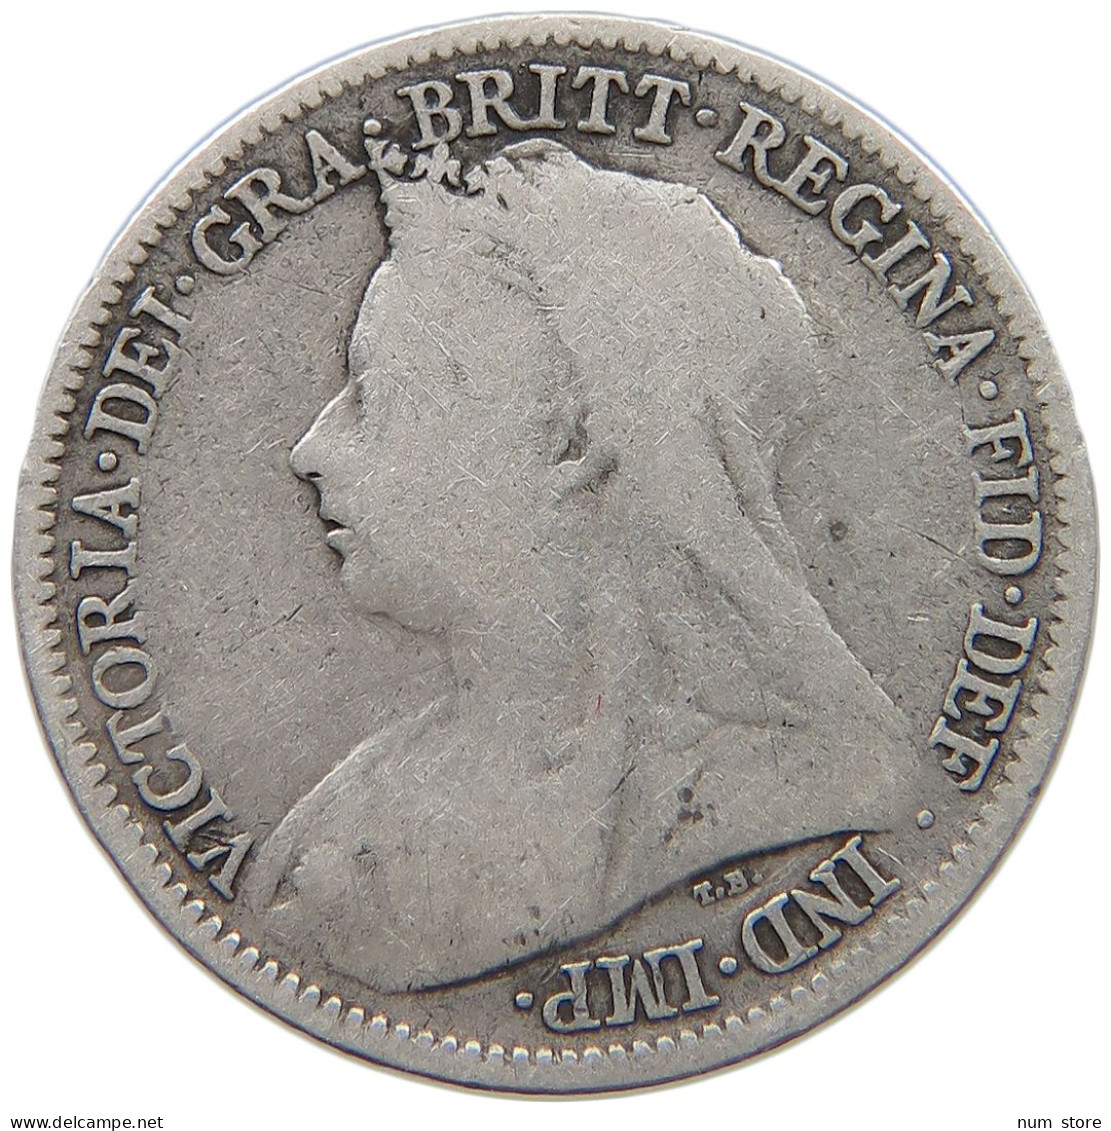 GREAT BRITAIN SIXPENCE 1899 VICTORIA 1837-1901 #MA 024826 - H. 6 Pence